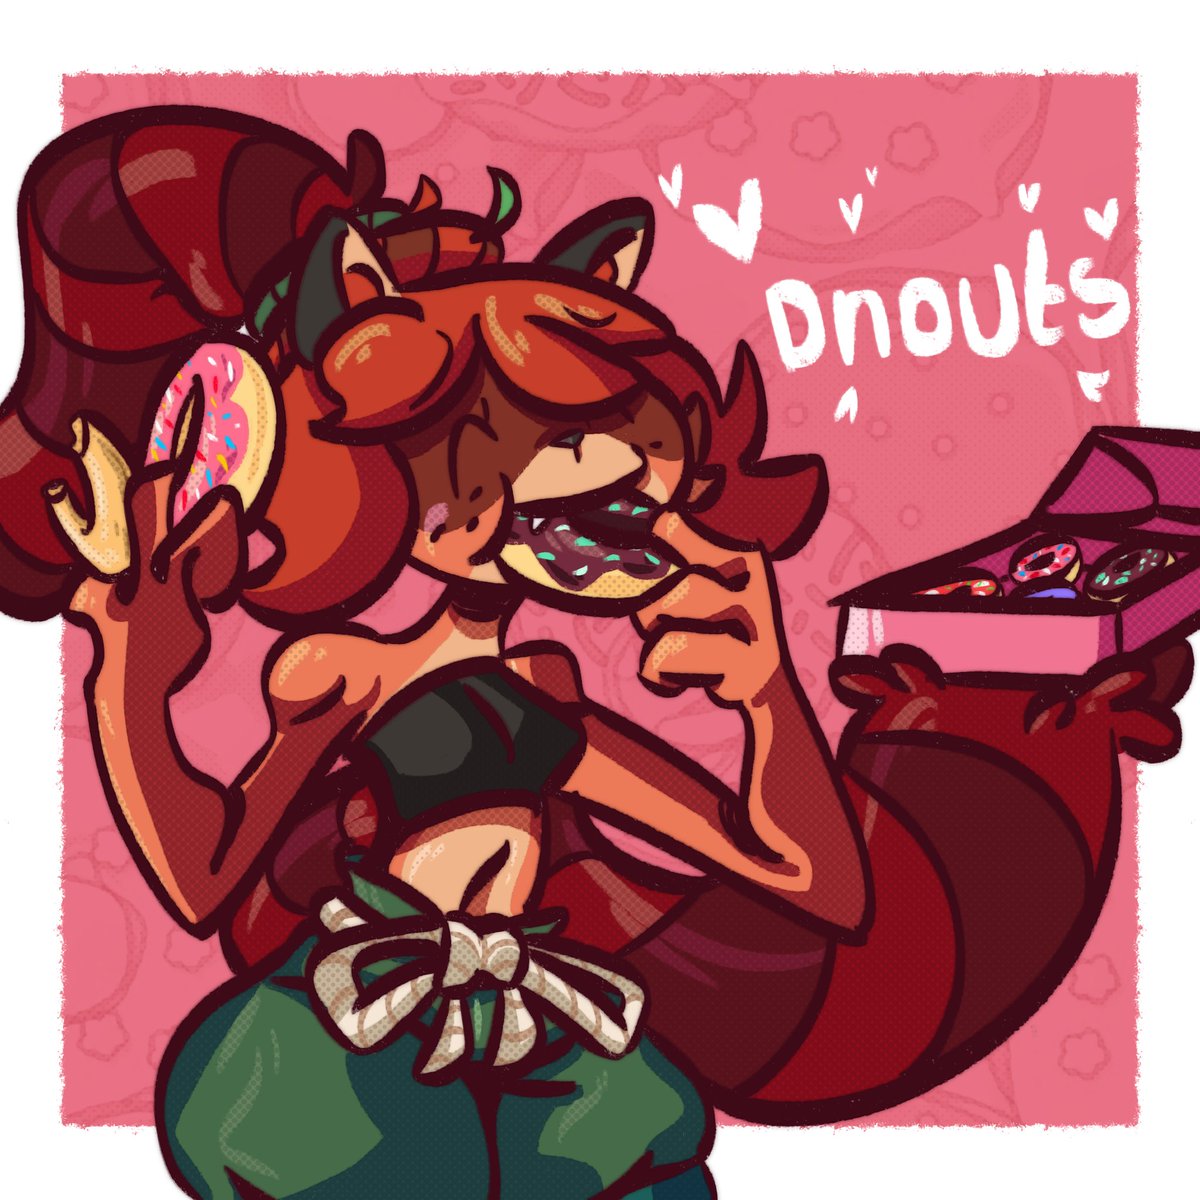 Today's the day 🍩🍩
And my lil Dnout enjoyer know it

#NationalDonutDay #DonutDay #furry #furryartist #ocart